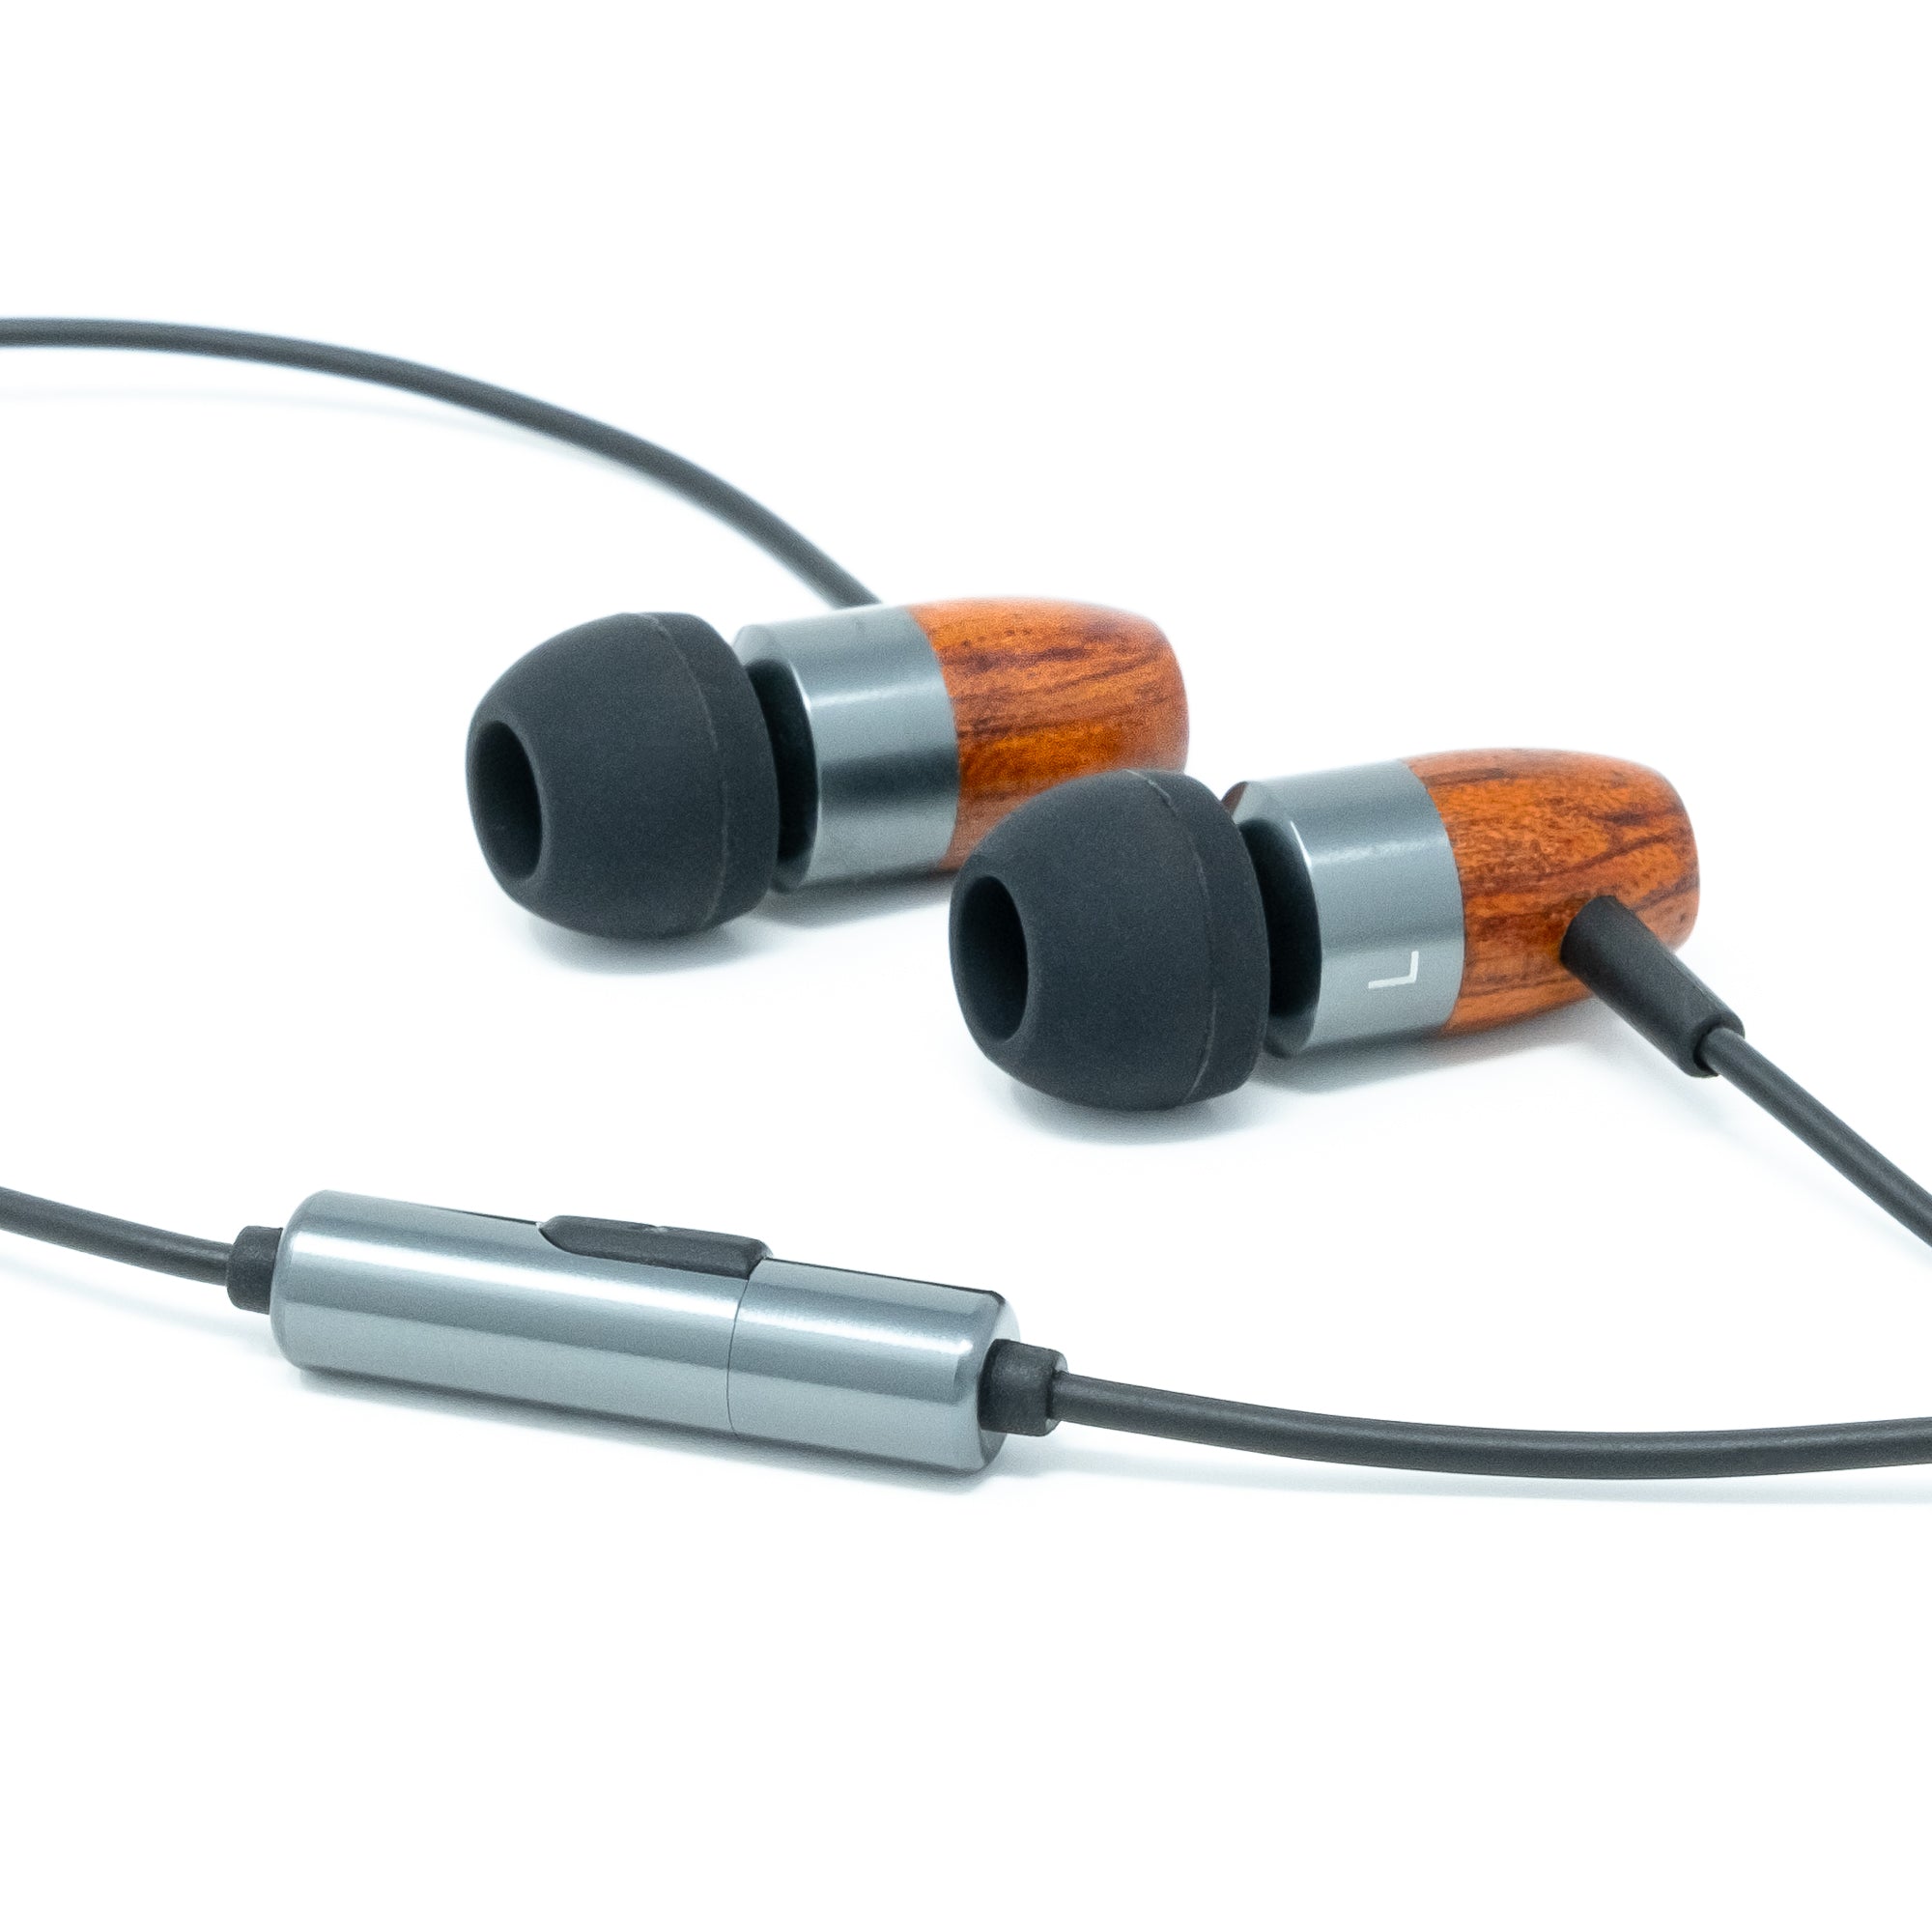 thinksound in20 headphones with mic control